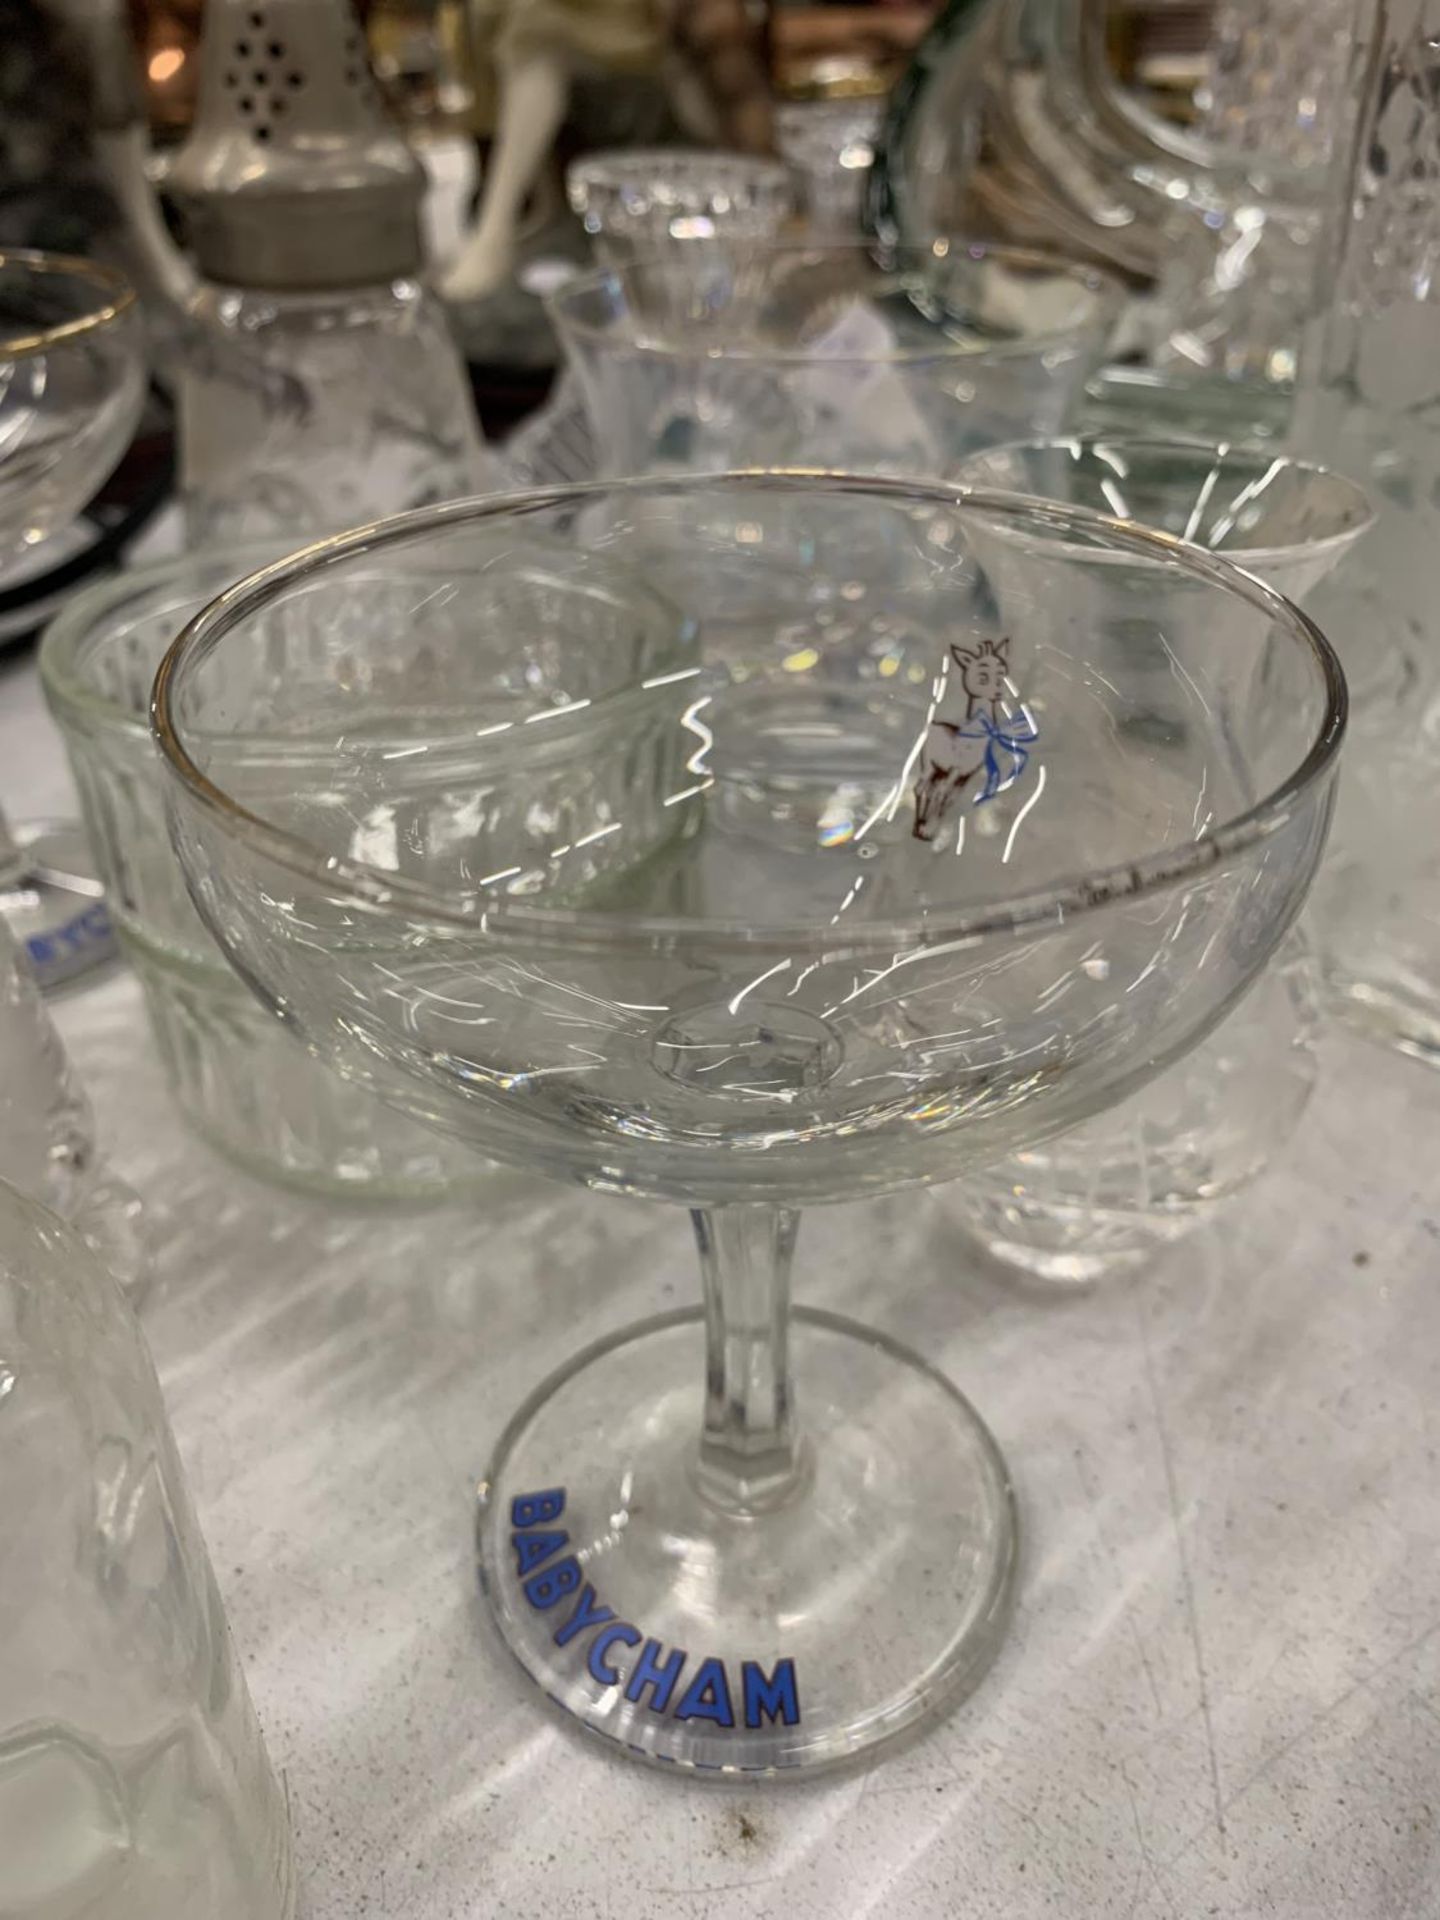 A QUANTITY OF GLASSWARE TO INCLUDE BOWLS, DECANTERS, BABYCHAM GLASSES, PAPERWEIGHTS, BOTTLES, ETC - Image 6 of 6